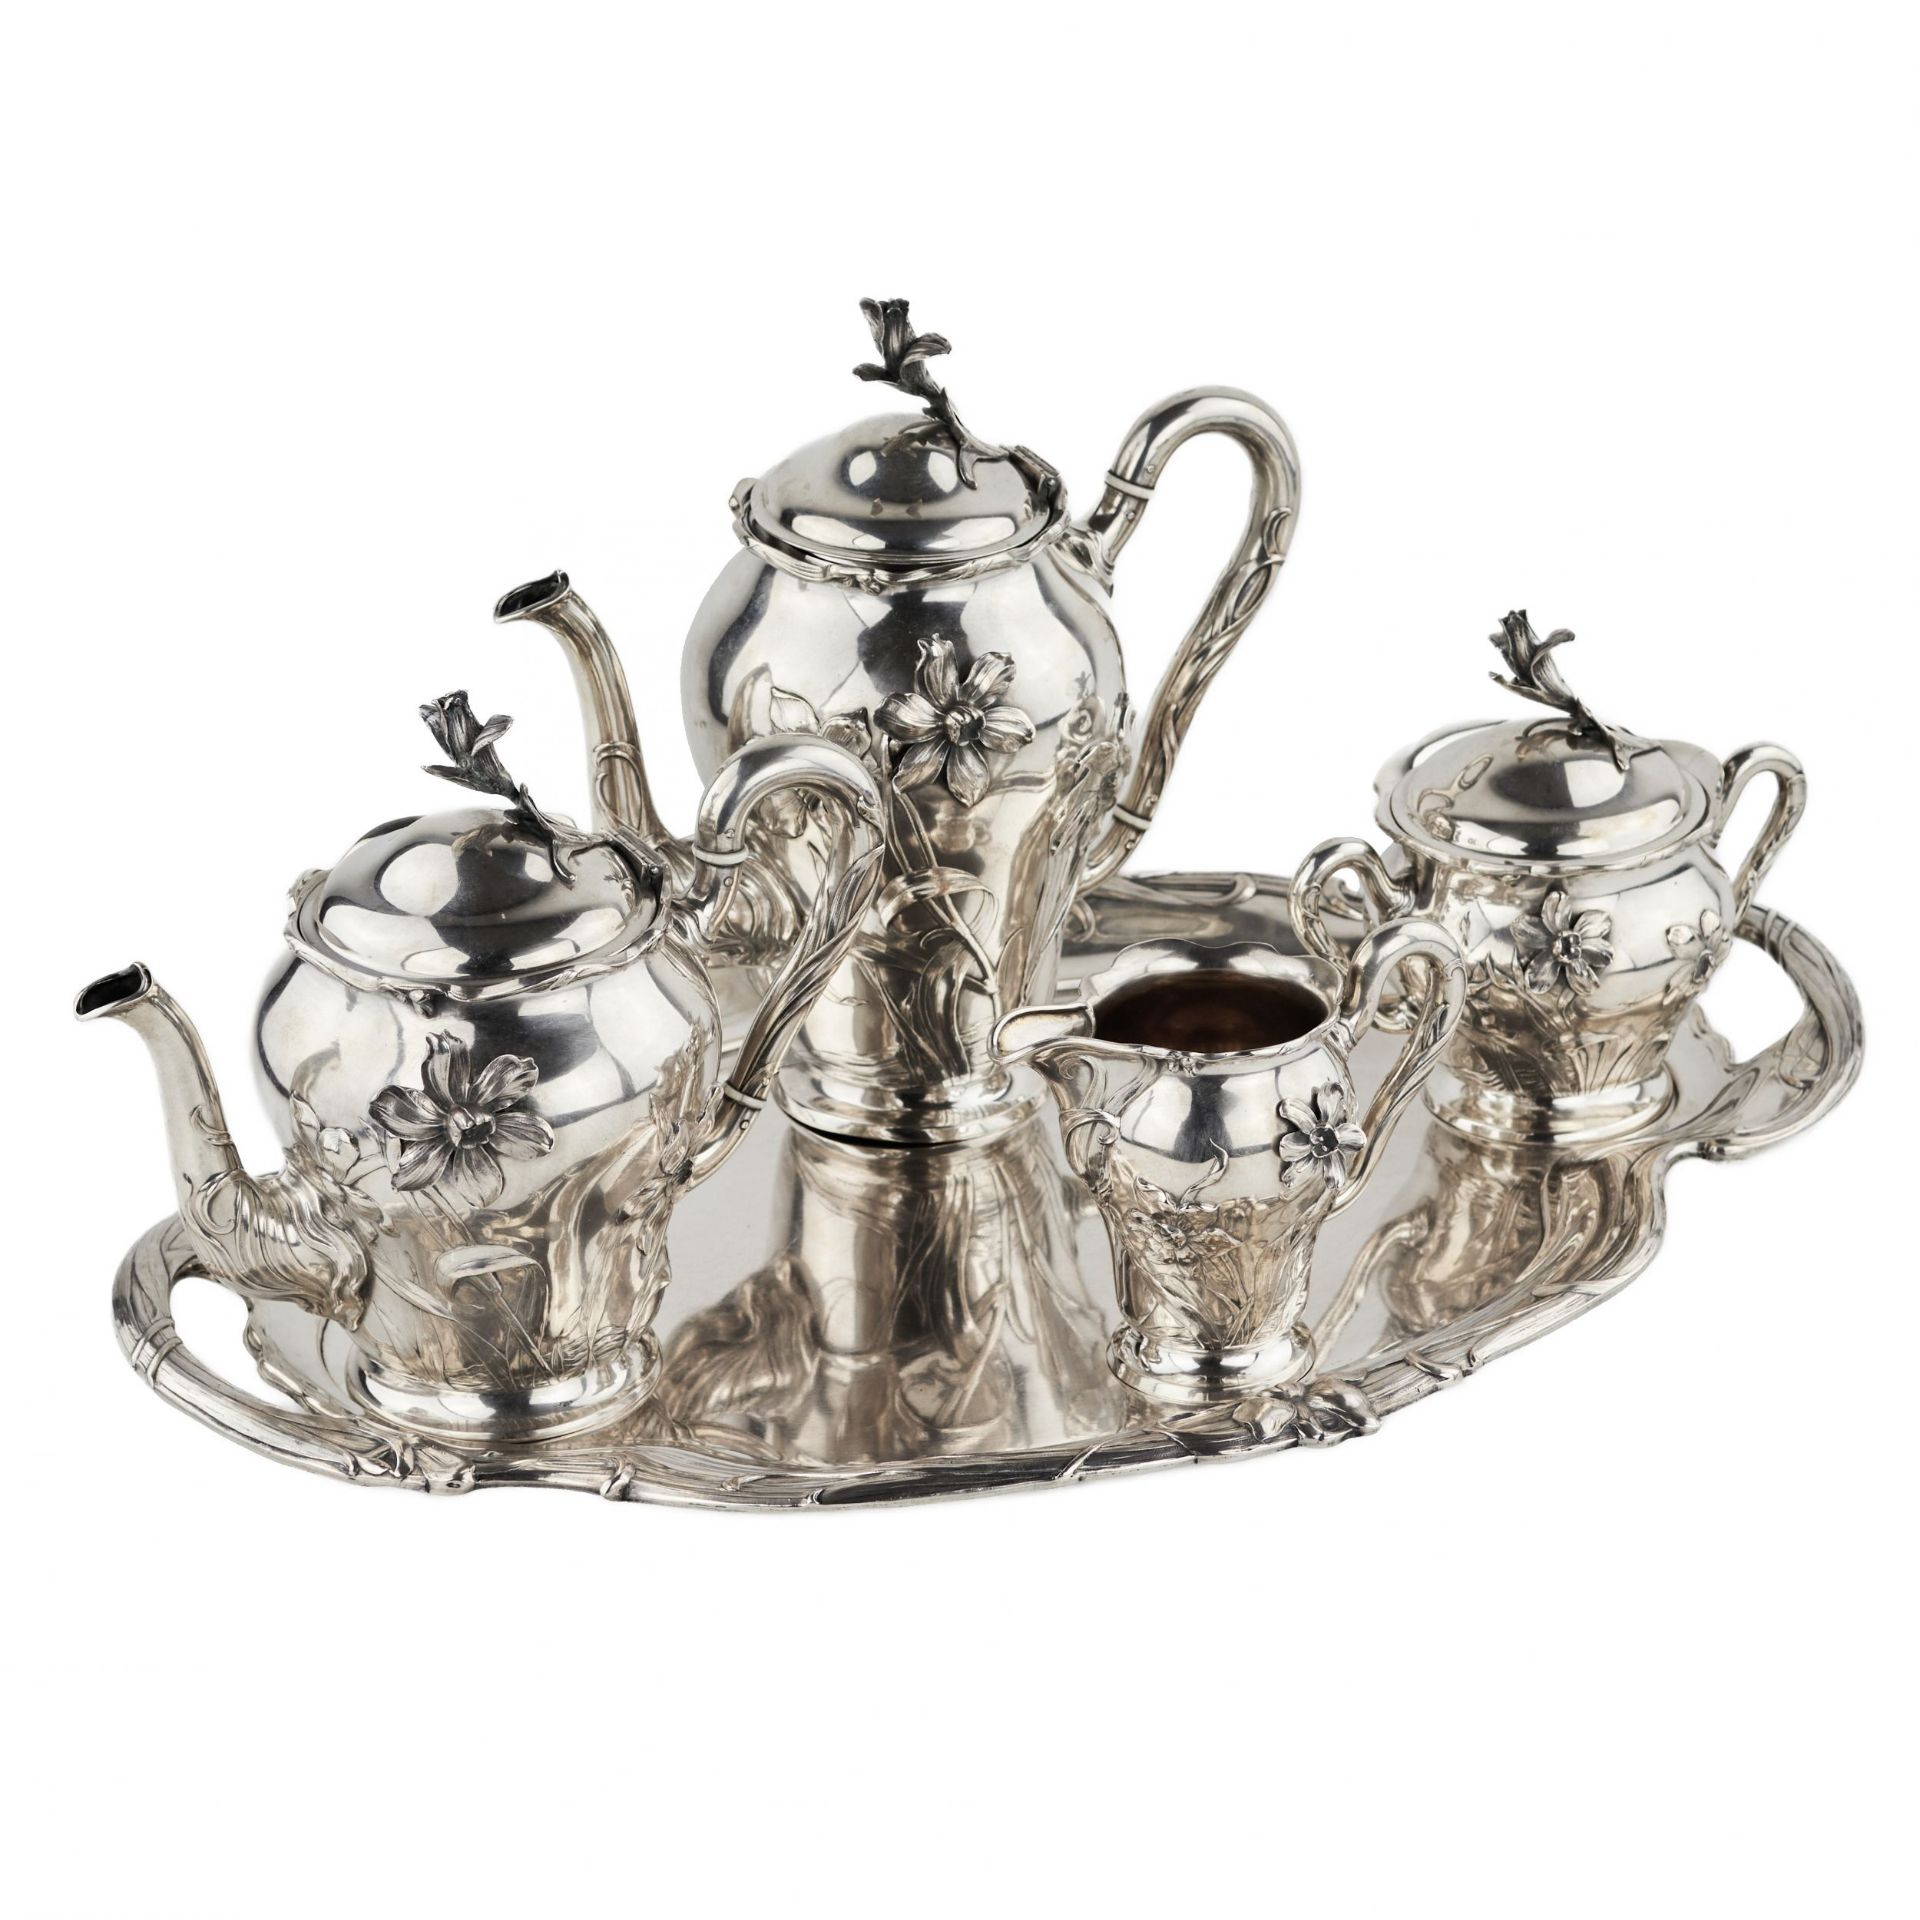 Silver tea and coffee service in Art Nouveau style. Bruckmann. After 1888. - Image 4 of 13